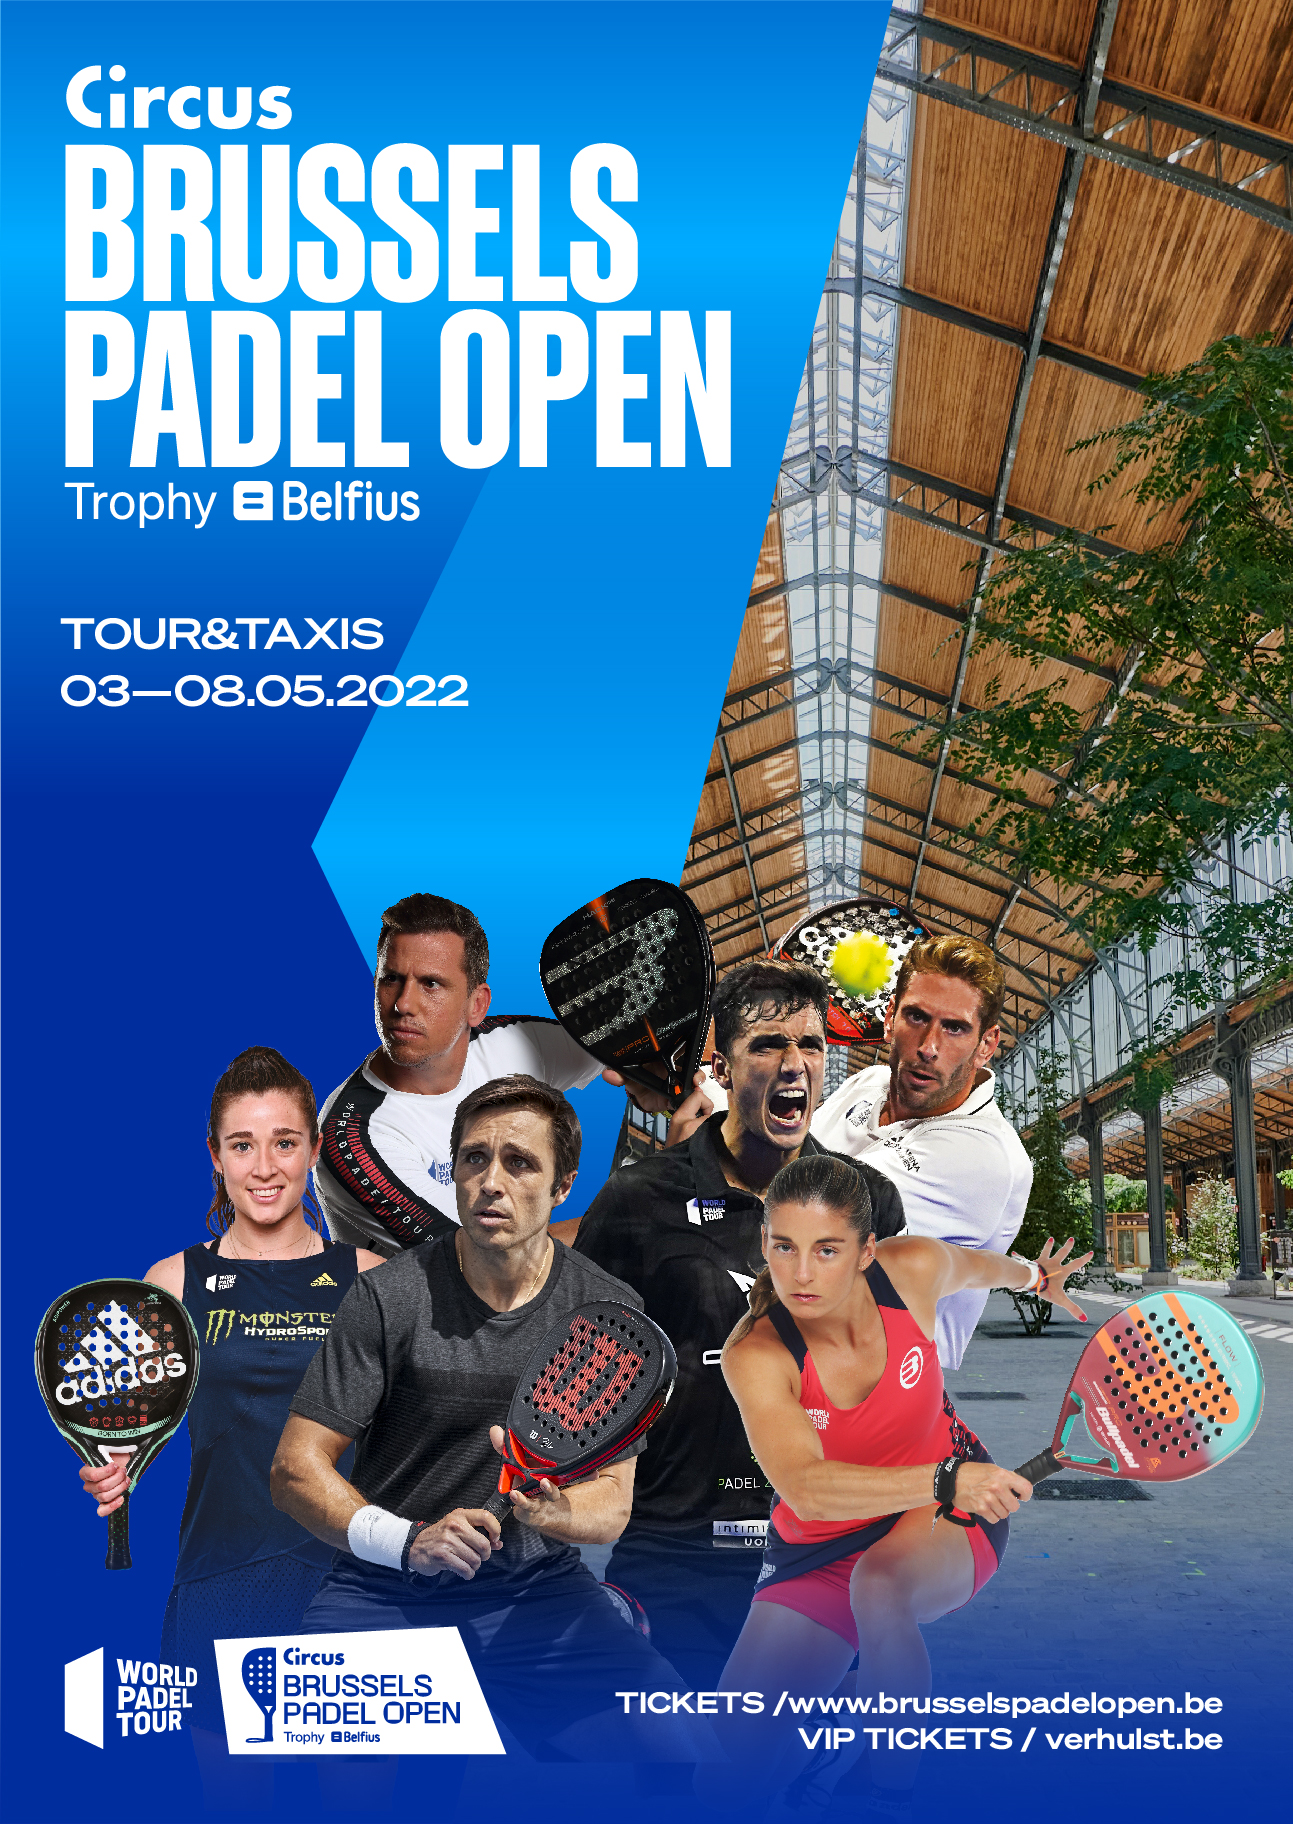 Circus Brussels Padel Open 2022 